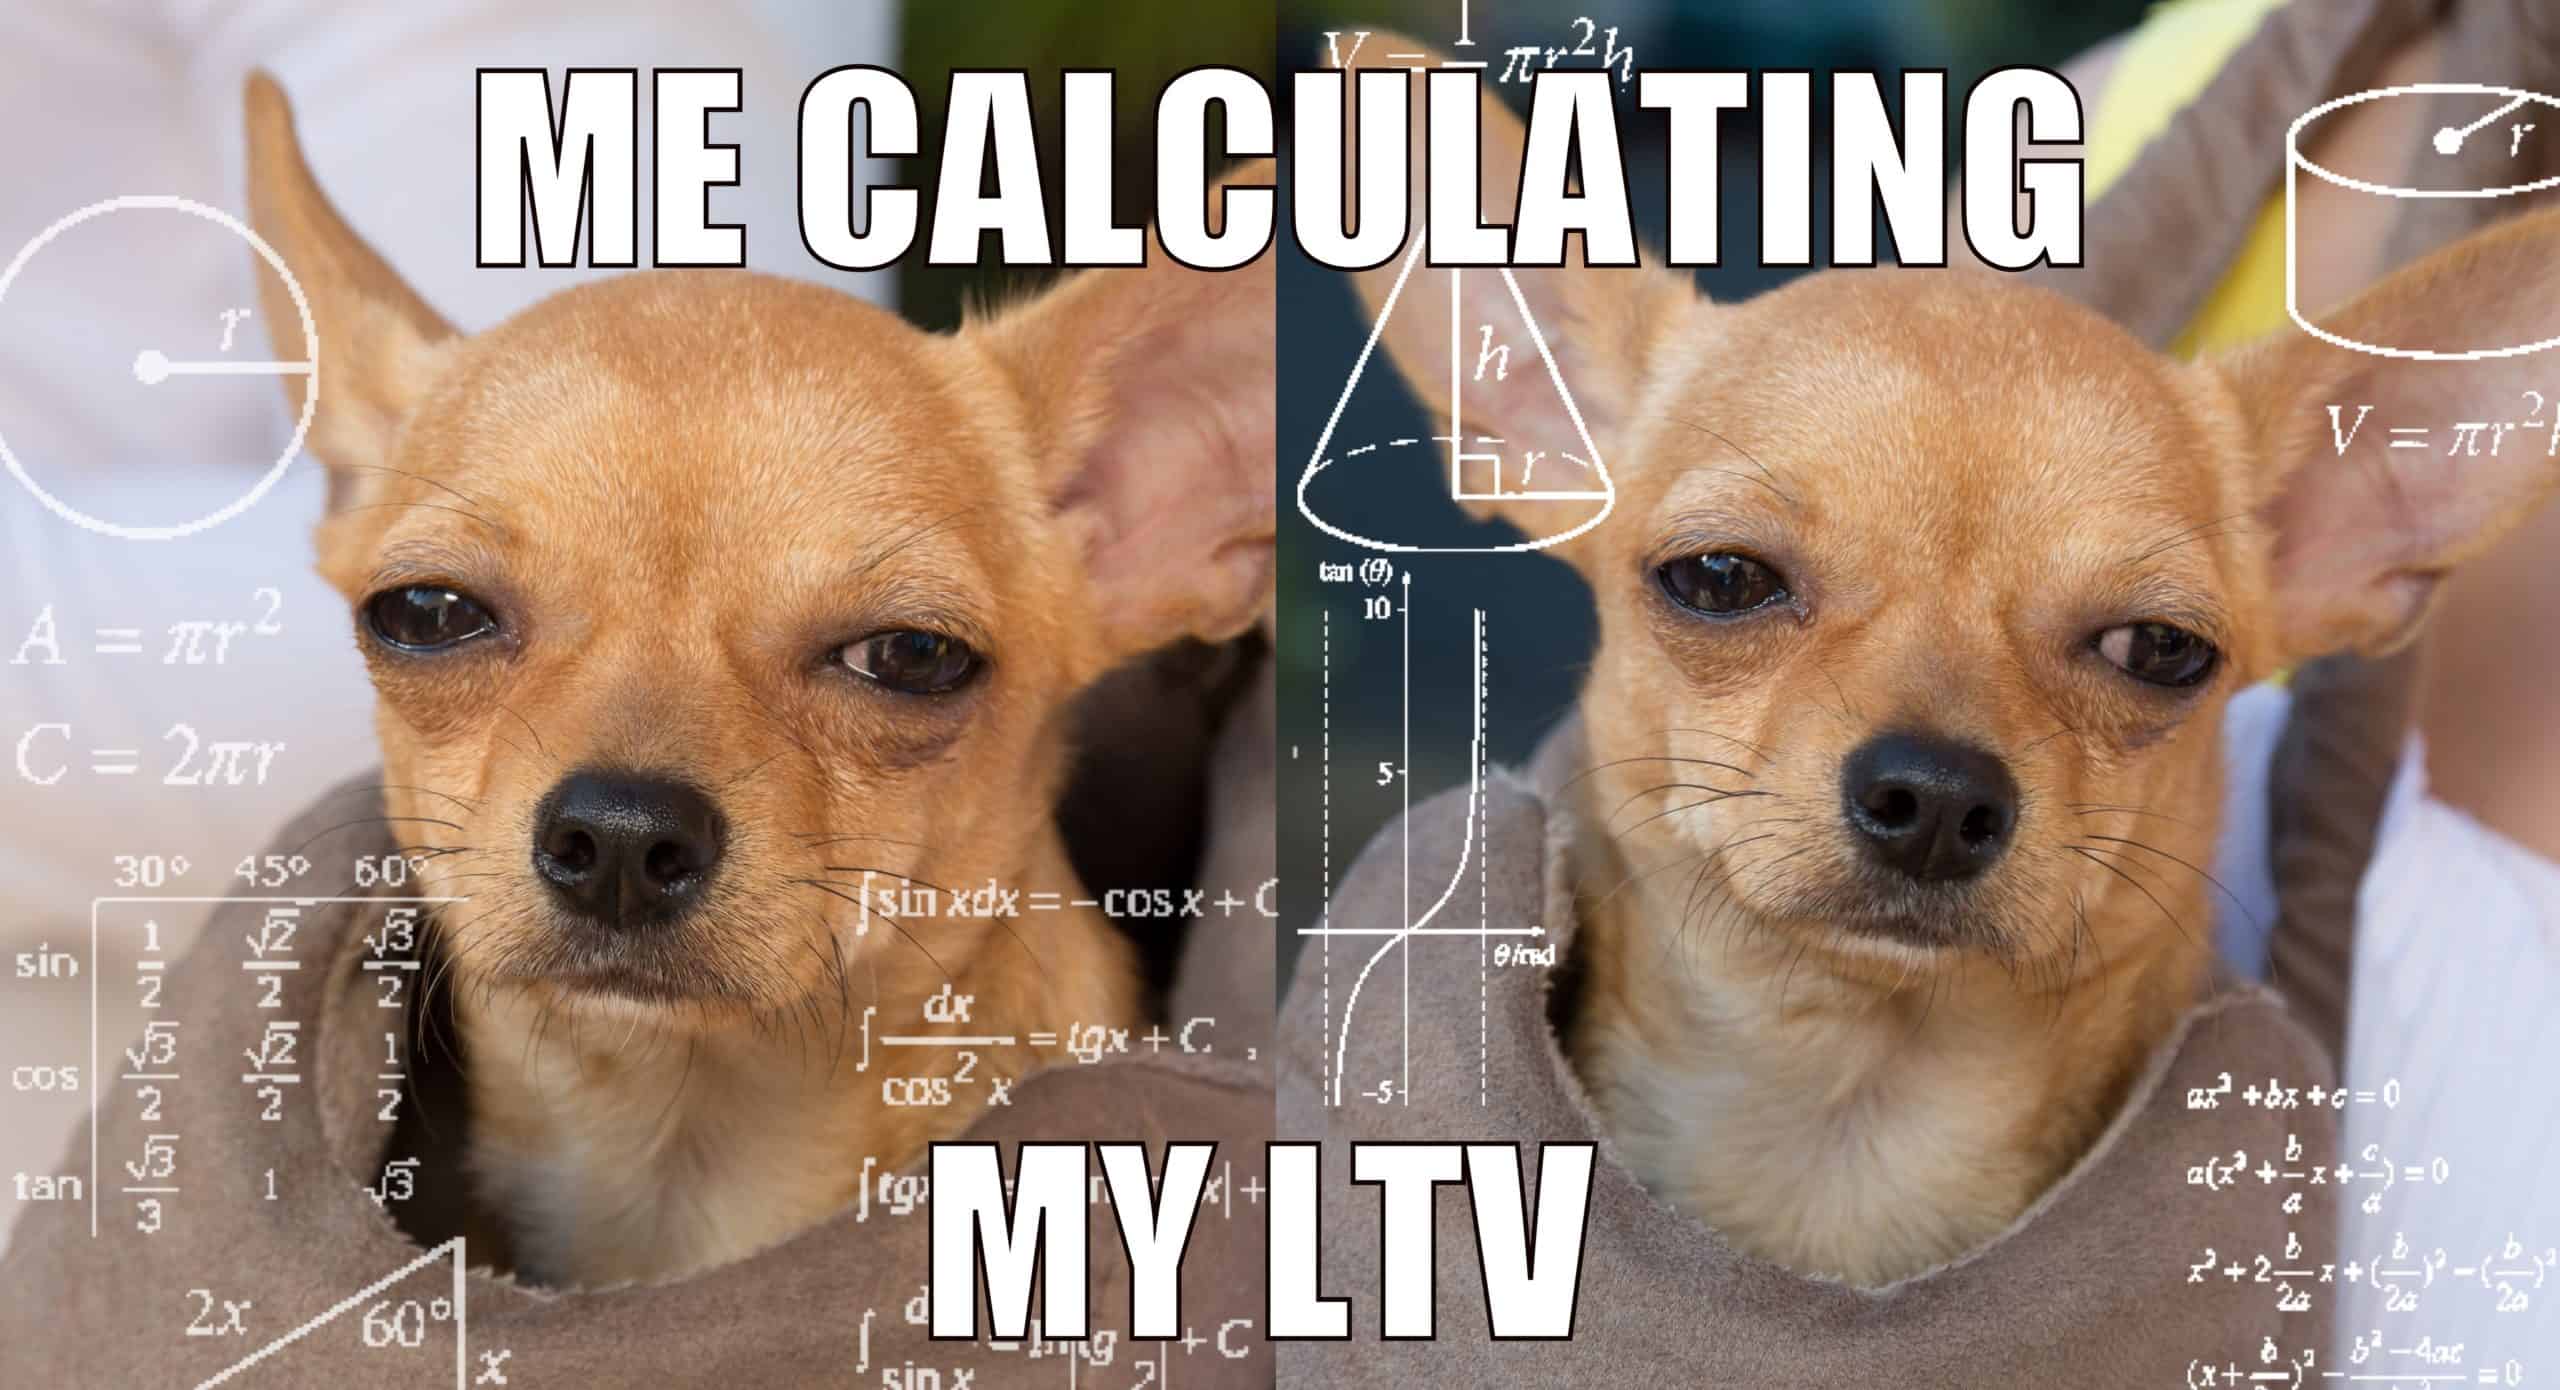 Dog meme confused while trying to calculate their loan-to-value